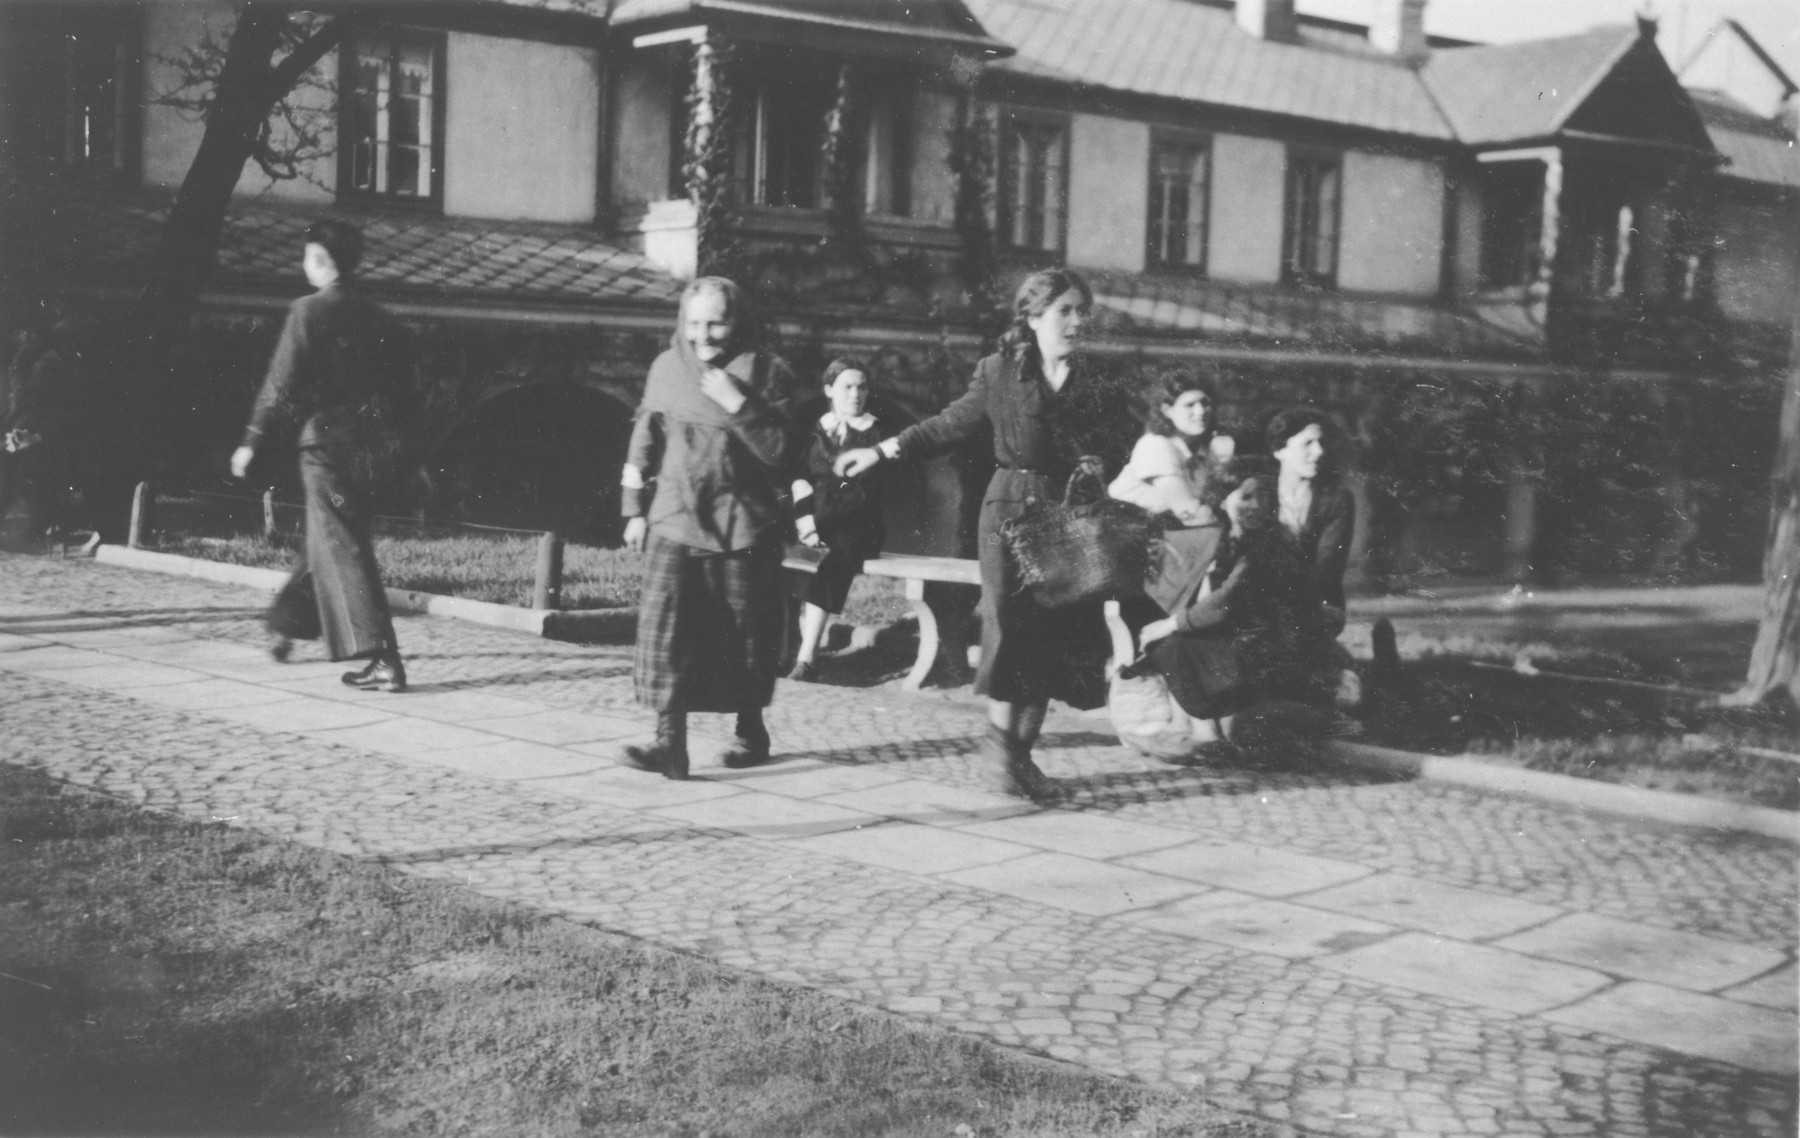 Men and women walk down a street and sit on benches in an unidentified ghetto.